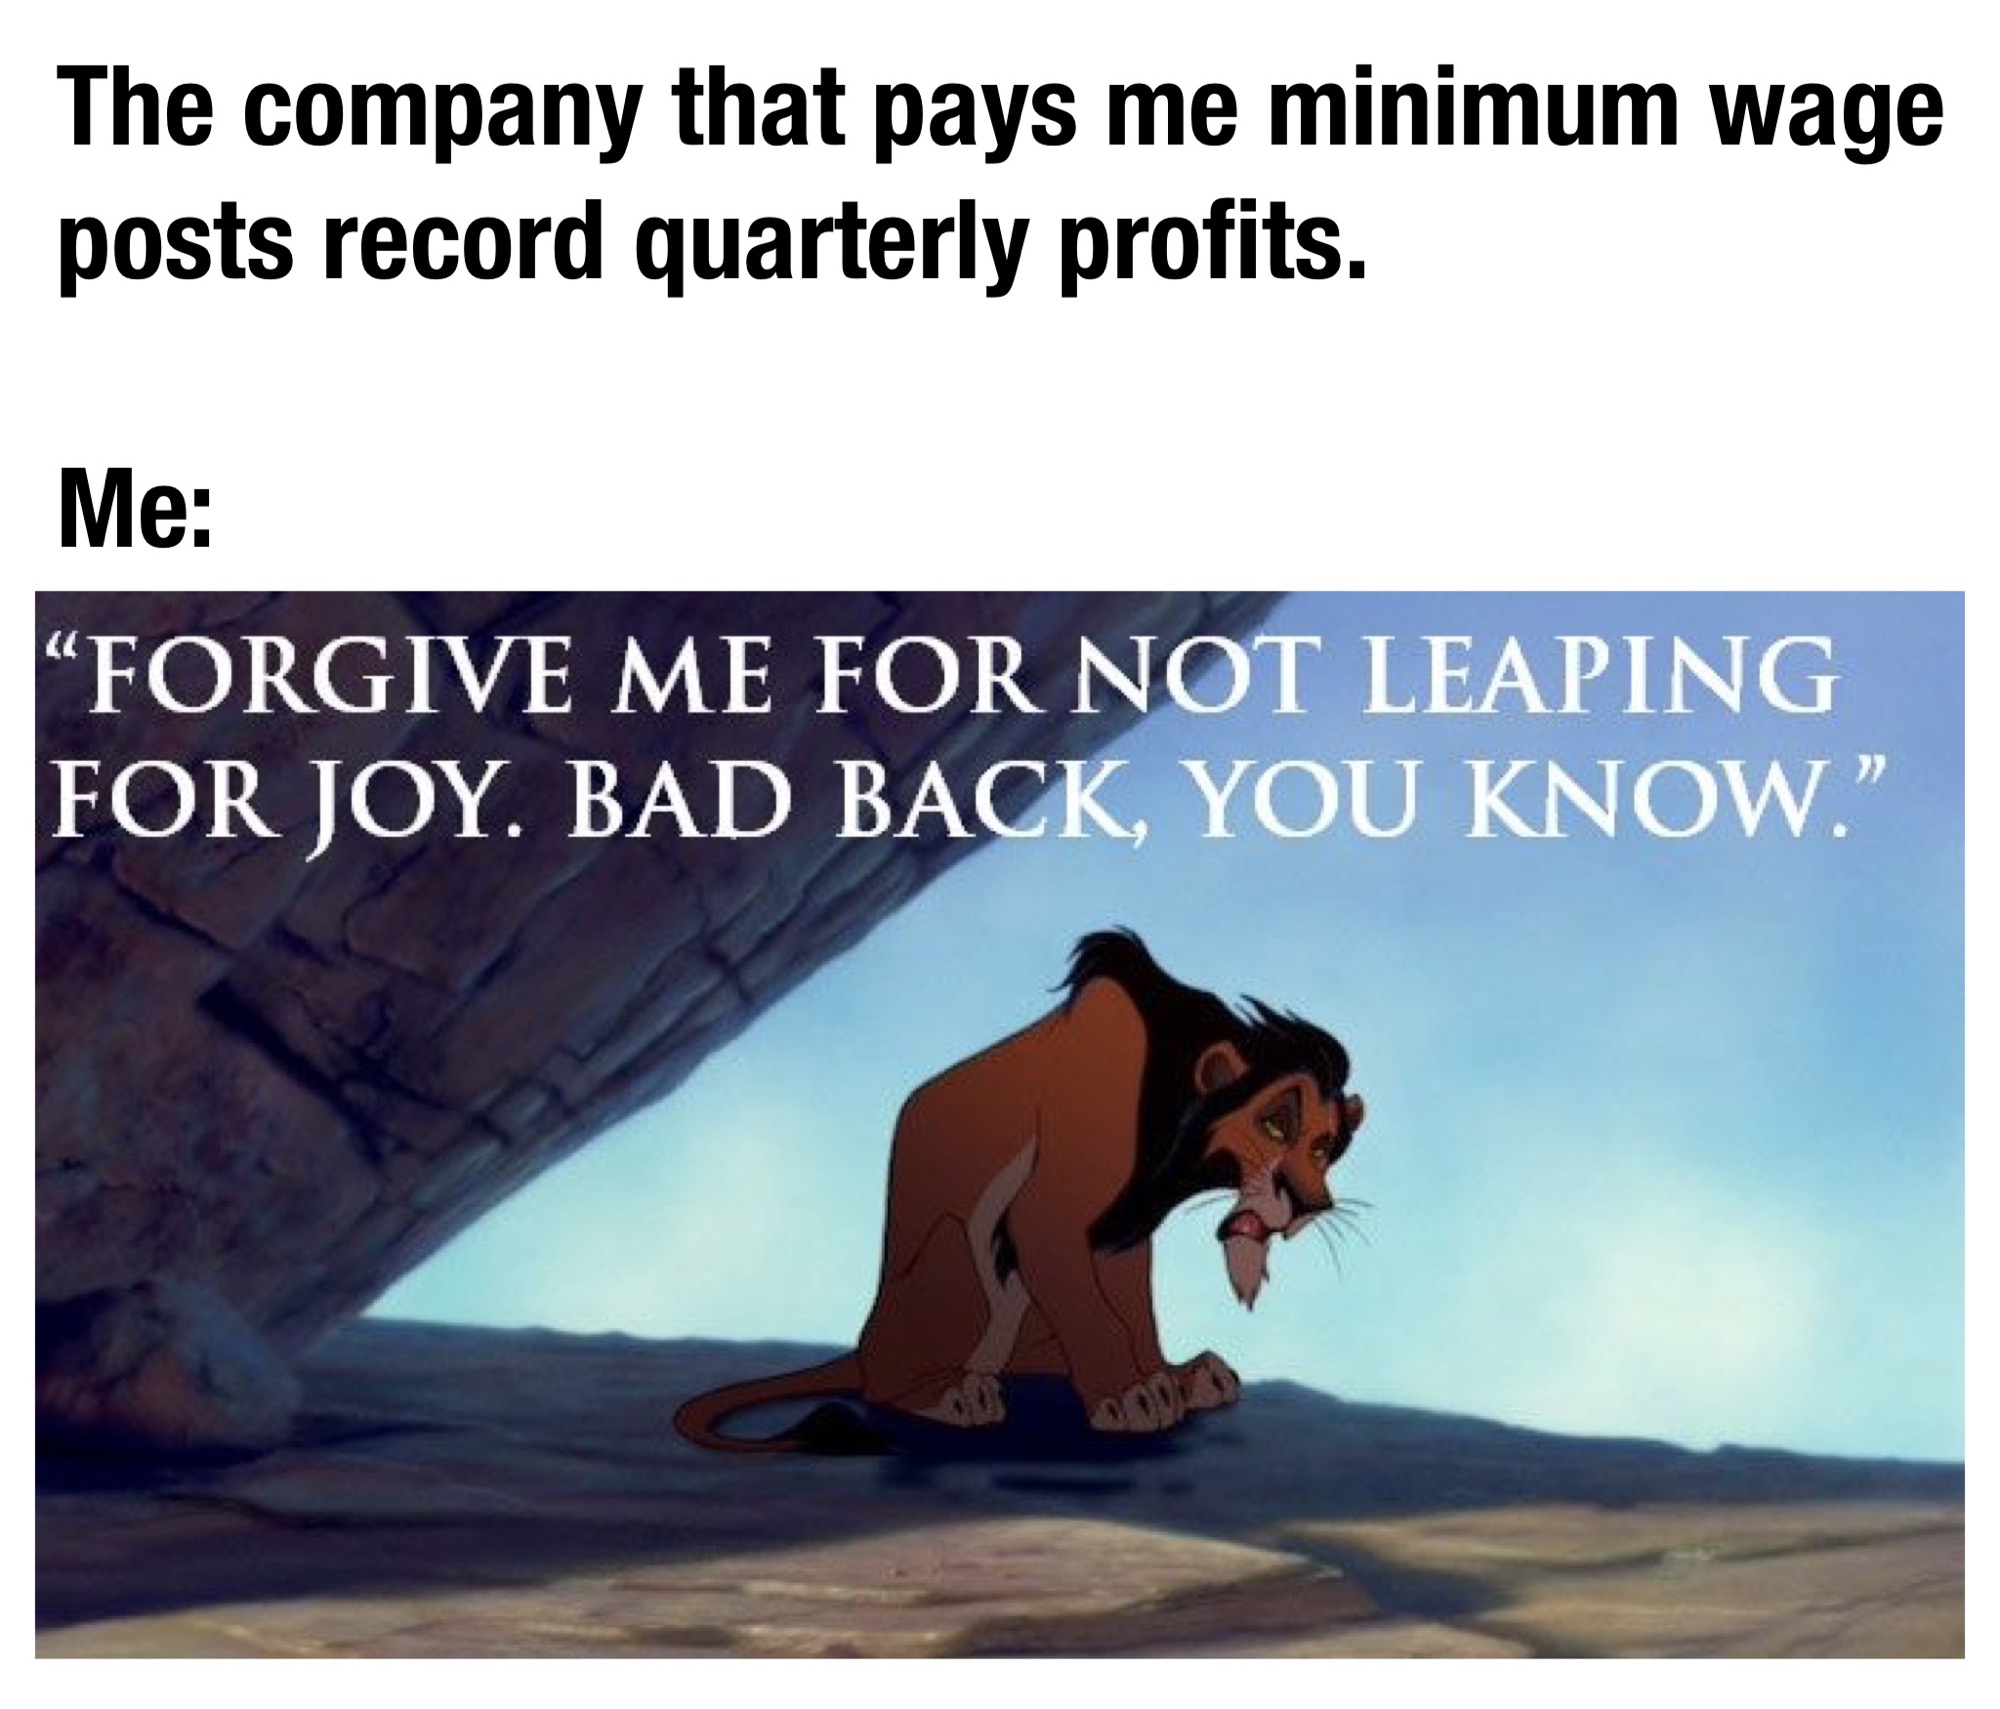 funny memes and pics  - photo caption - The company that pays me minimum wage posts record quarterly profits. Me "Forgive Me For Not Leaping For Joy. Bad Back, You Know."